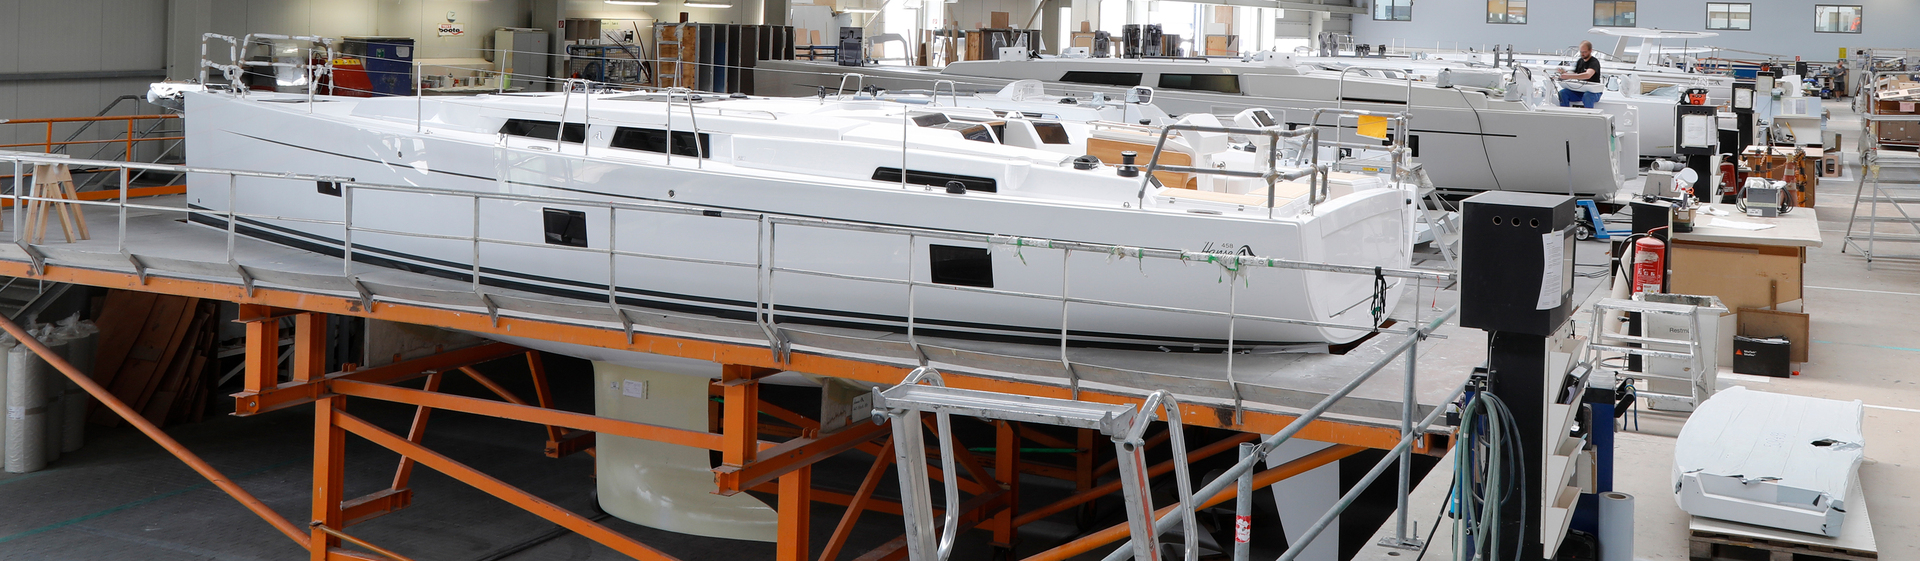 Hanse yacht in production